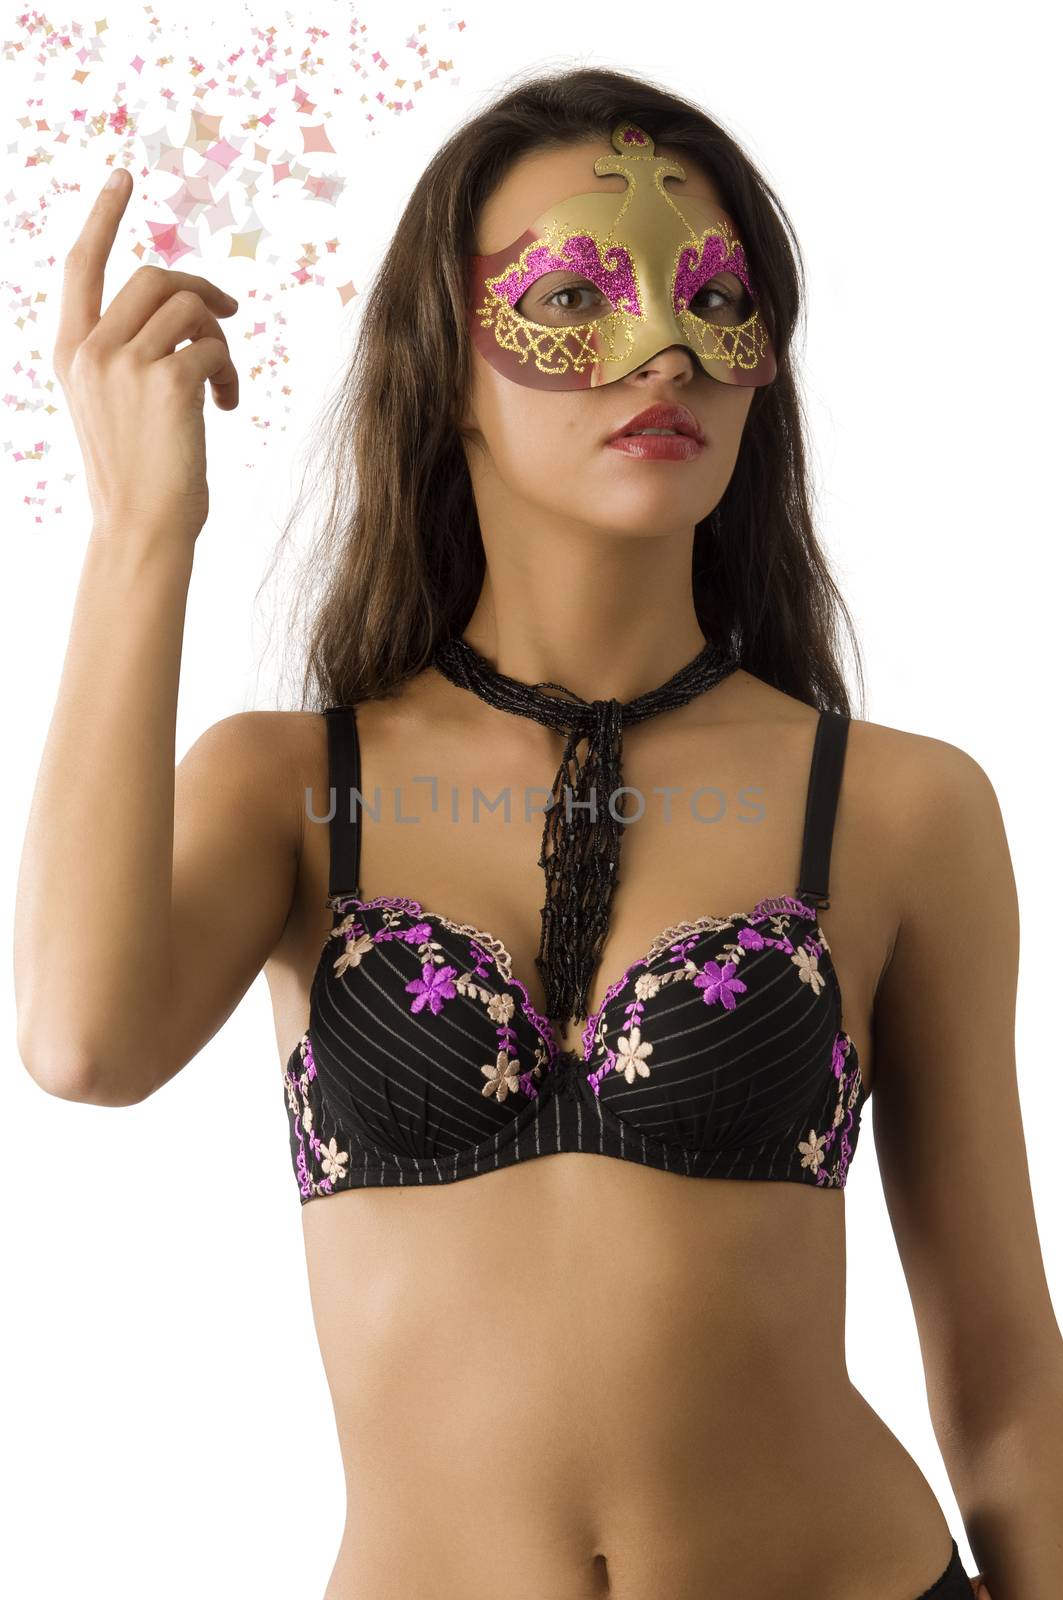 sensual brunette showing her bra and hiding face behind a carnival mask